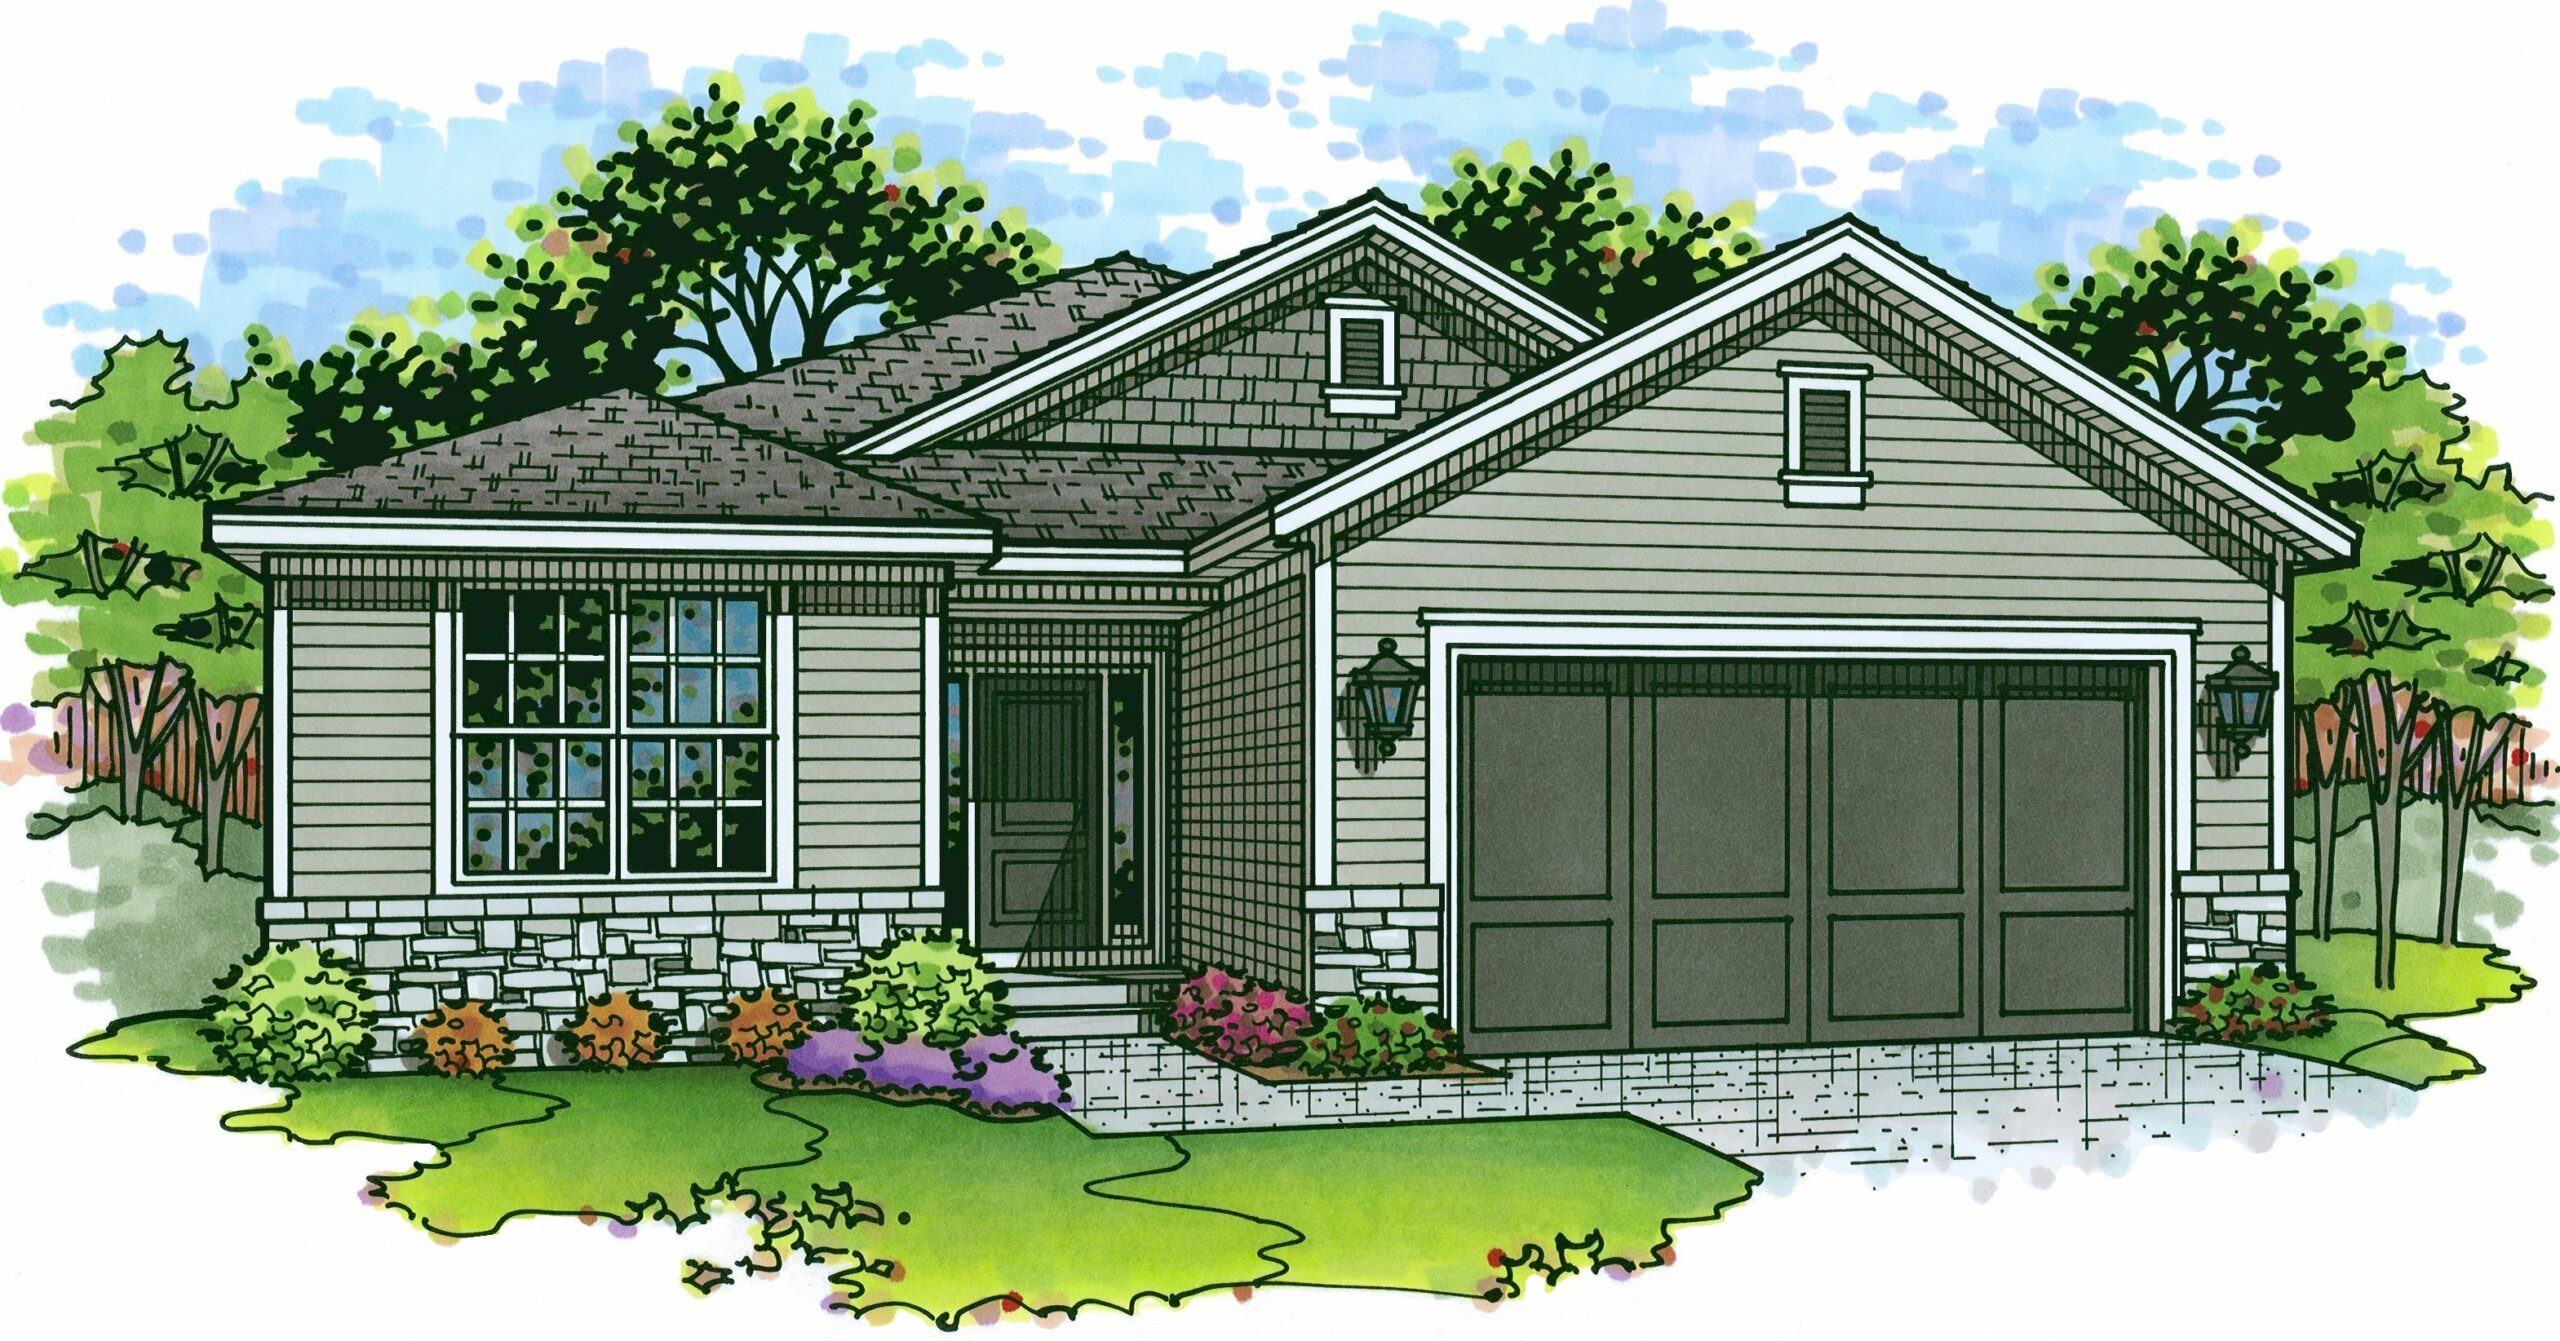 Rendering of the front elevation of the Wisteria model from Lambie Homes